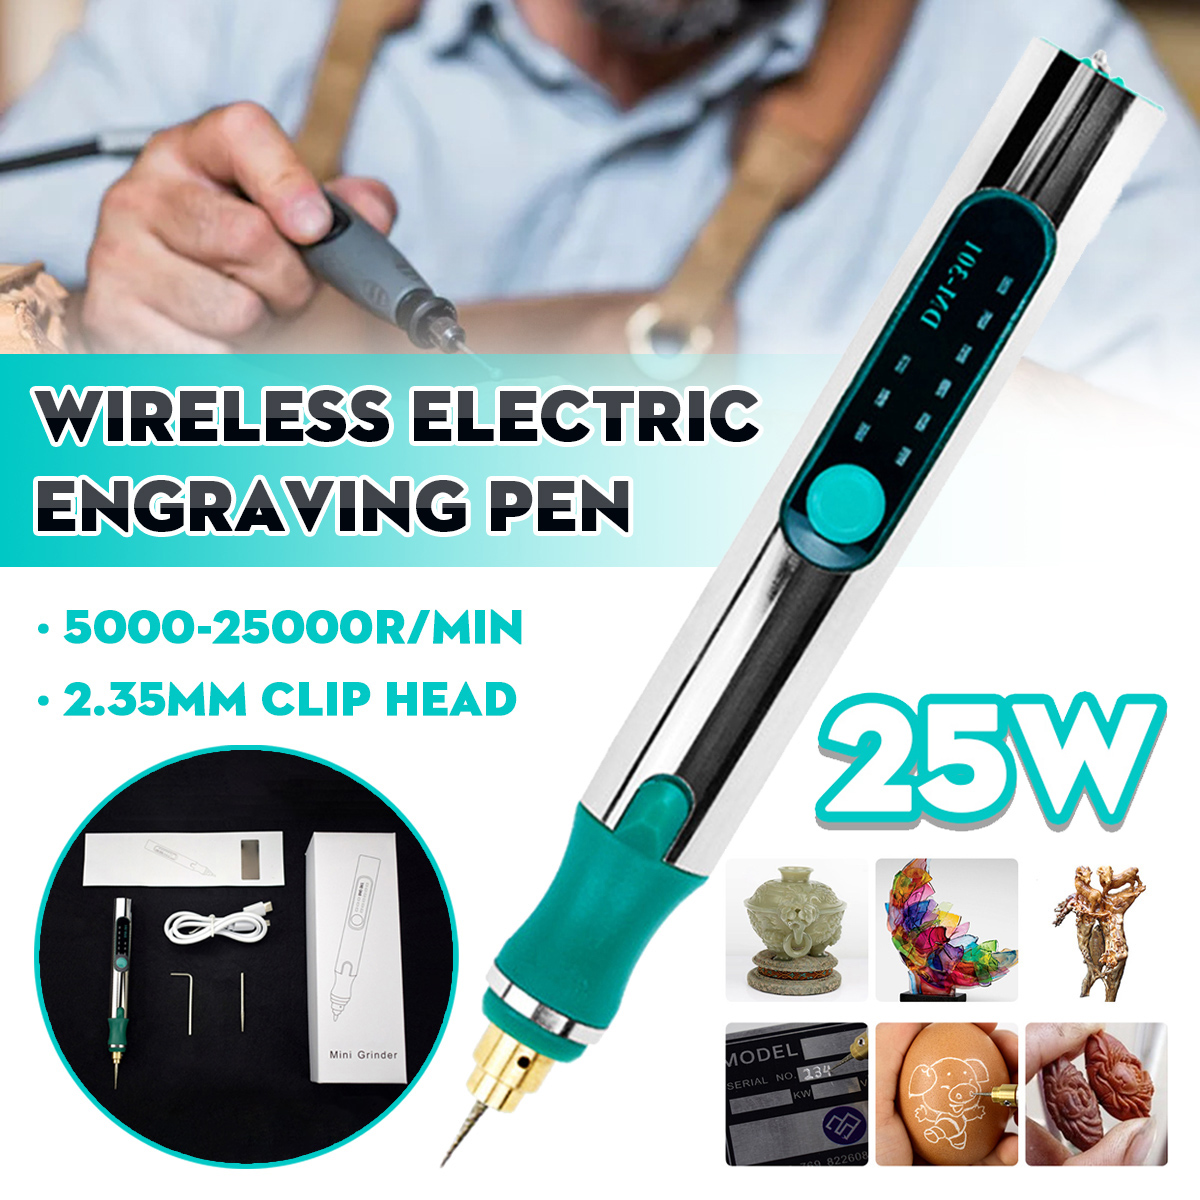 25000RPM-Portable-Mini-Electric-Grinder-3-Gears-Carving-Rotary-Pen-Drill-Engraving-Grinding-Tool-W-B-1875157-2